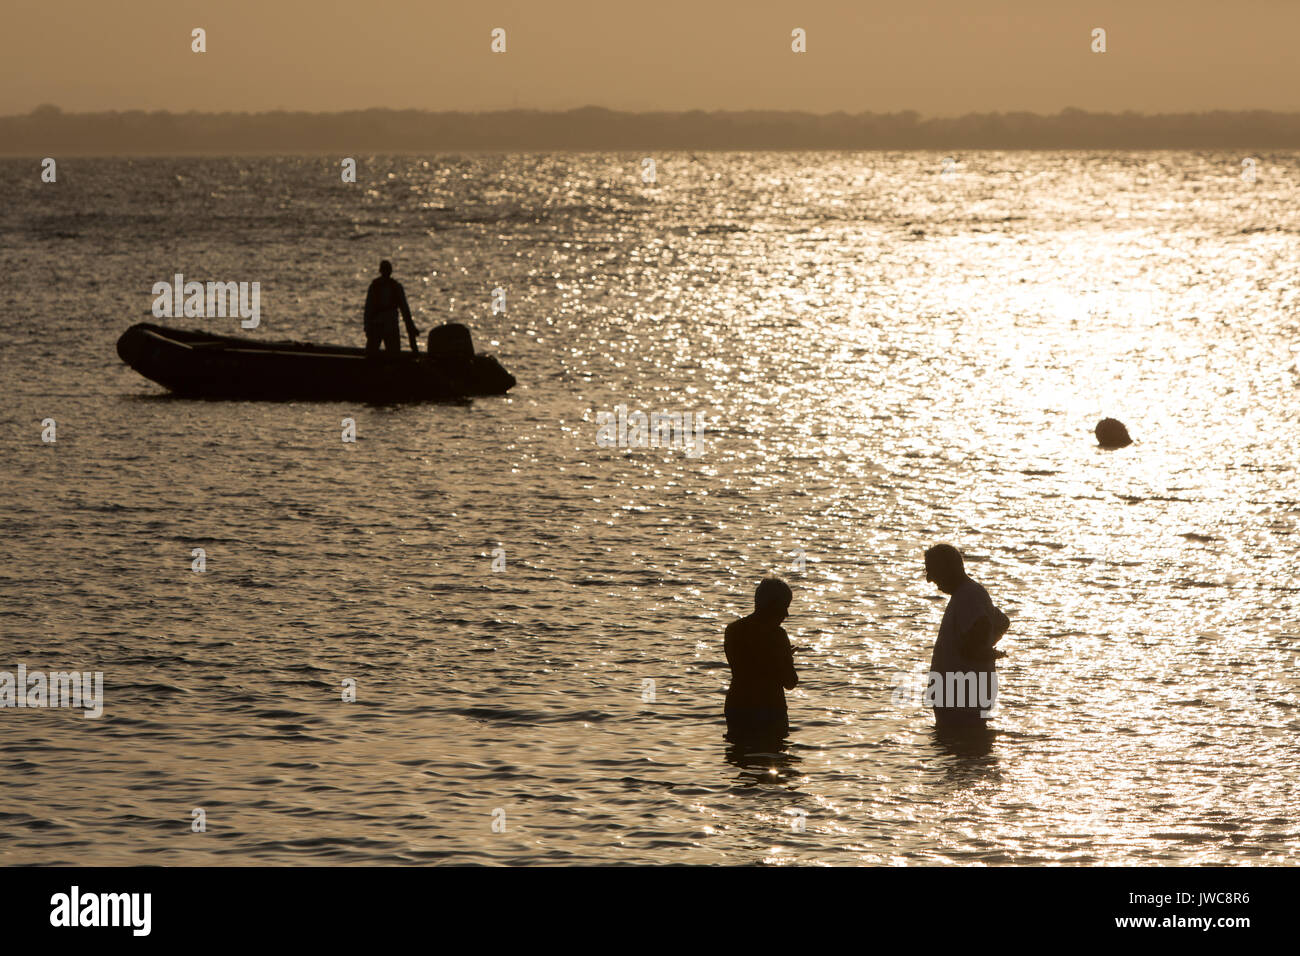 As the sun sets over the waters near Iguana Island,Isla Iguana,a man in an inflatable boat watches travelers stand in the water. Stock Photo